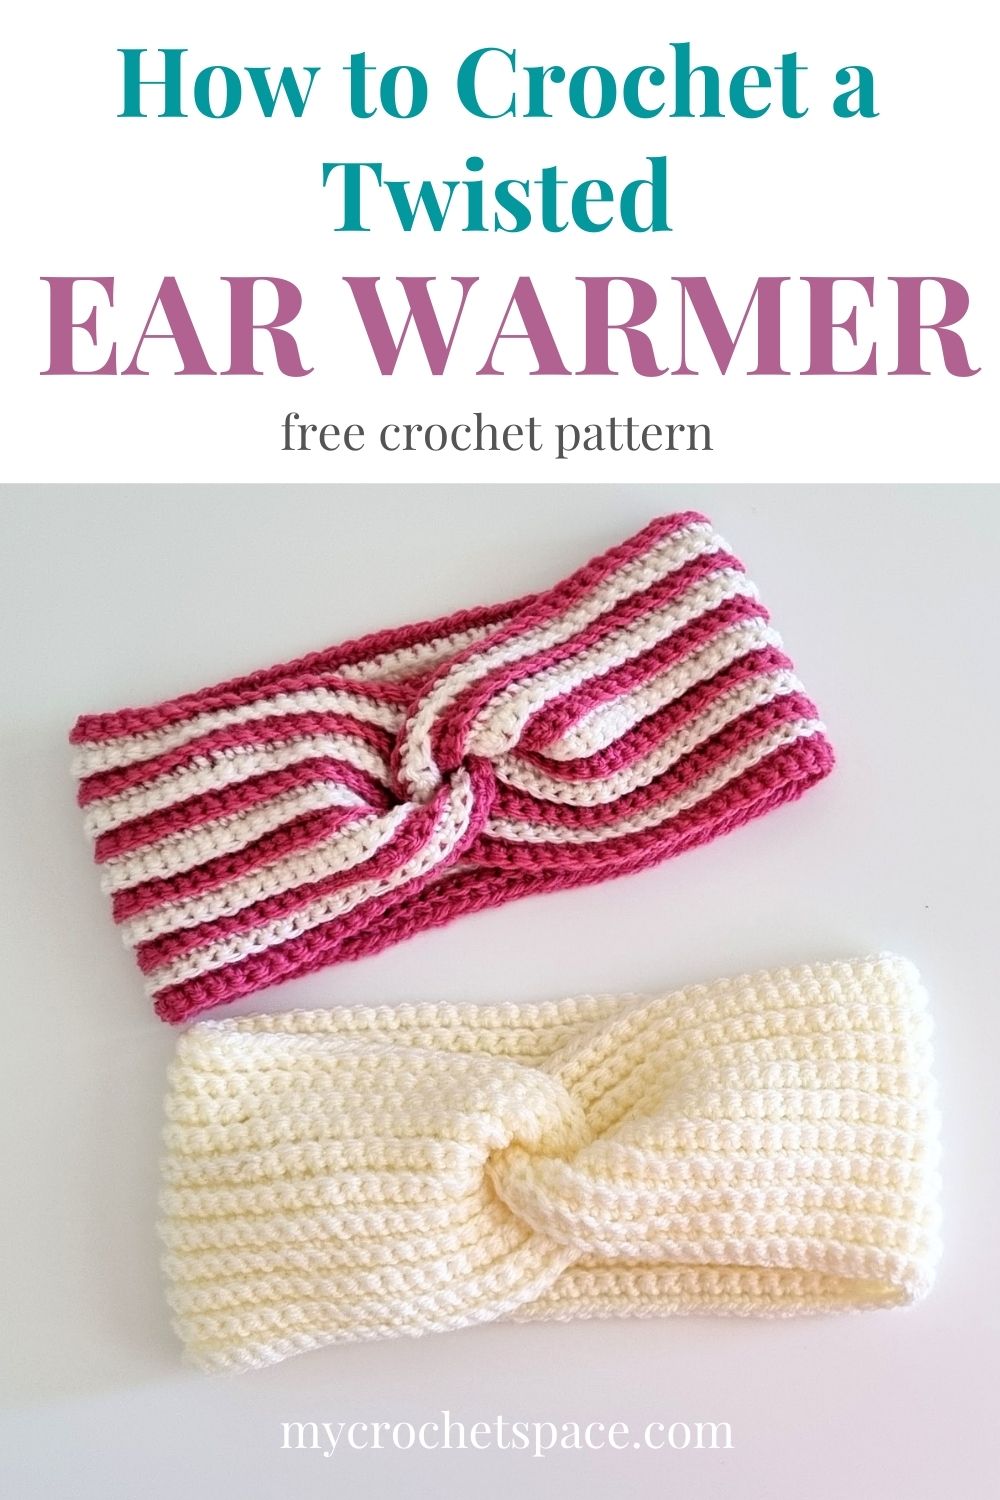 Colorful and Cozy Crochet Ear Warmers with Free Patterns - Your Crochet